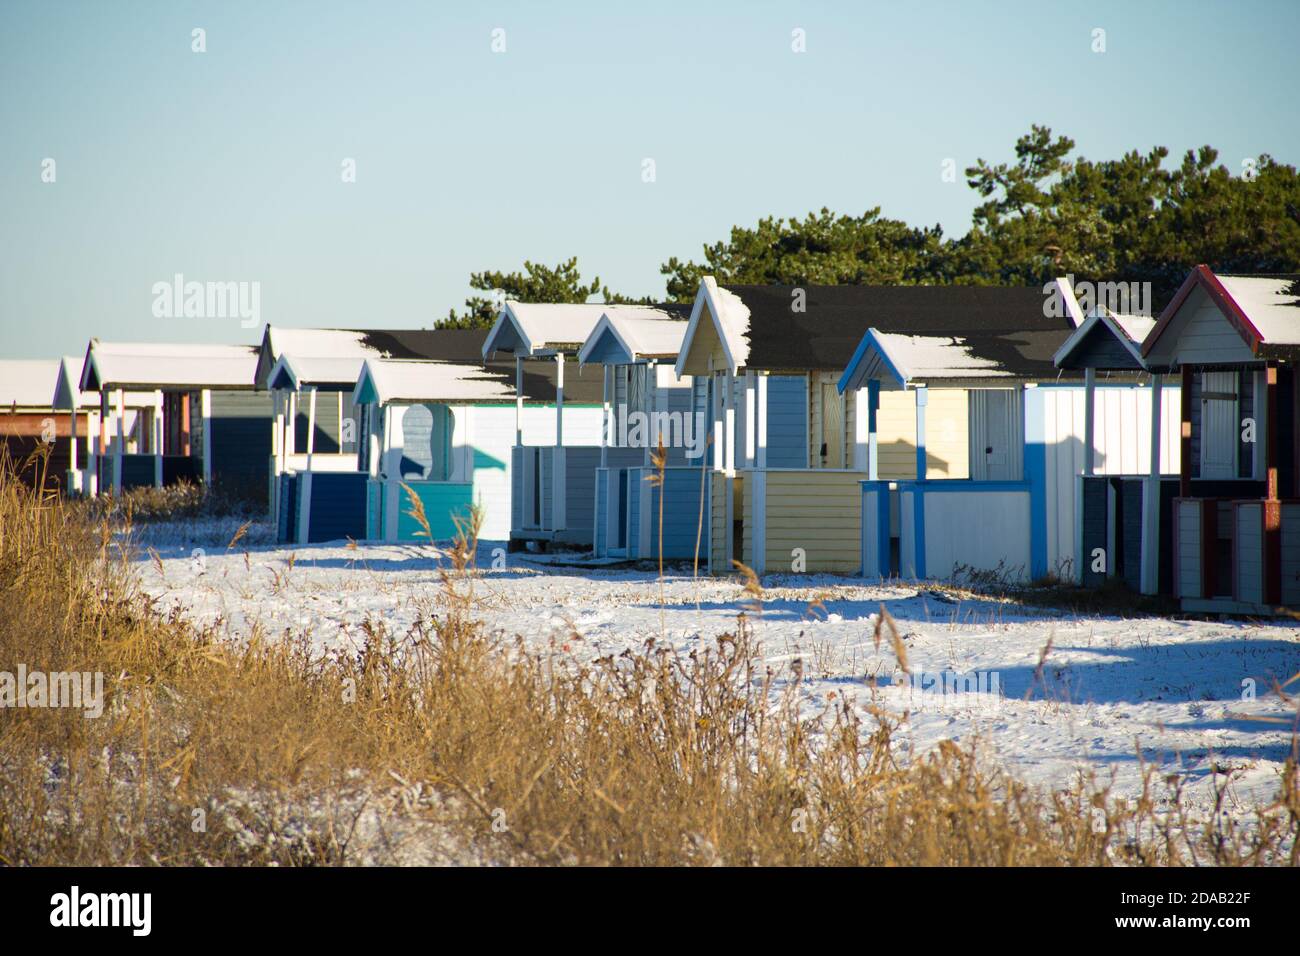 Candy coloured beach hut decorating the snowy beach of Skanor in south of Sweden Stock Photo